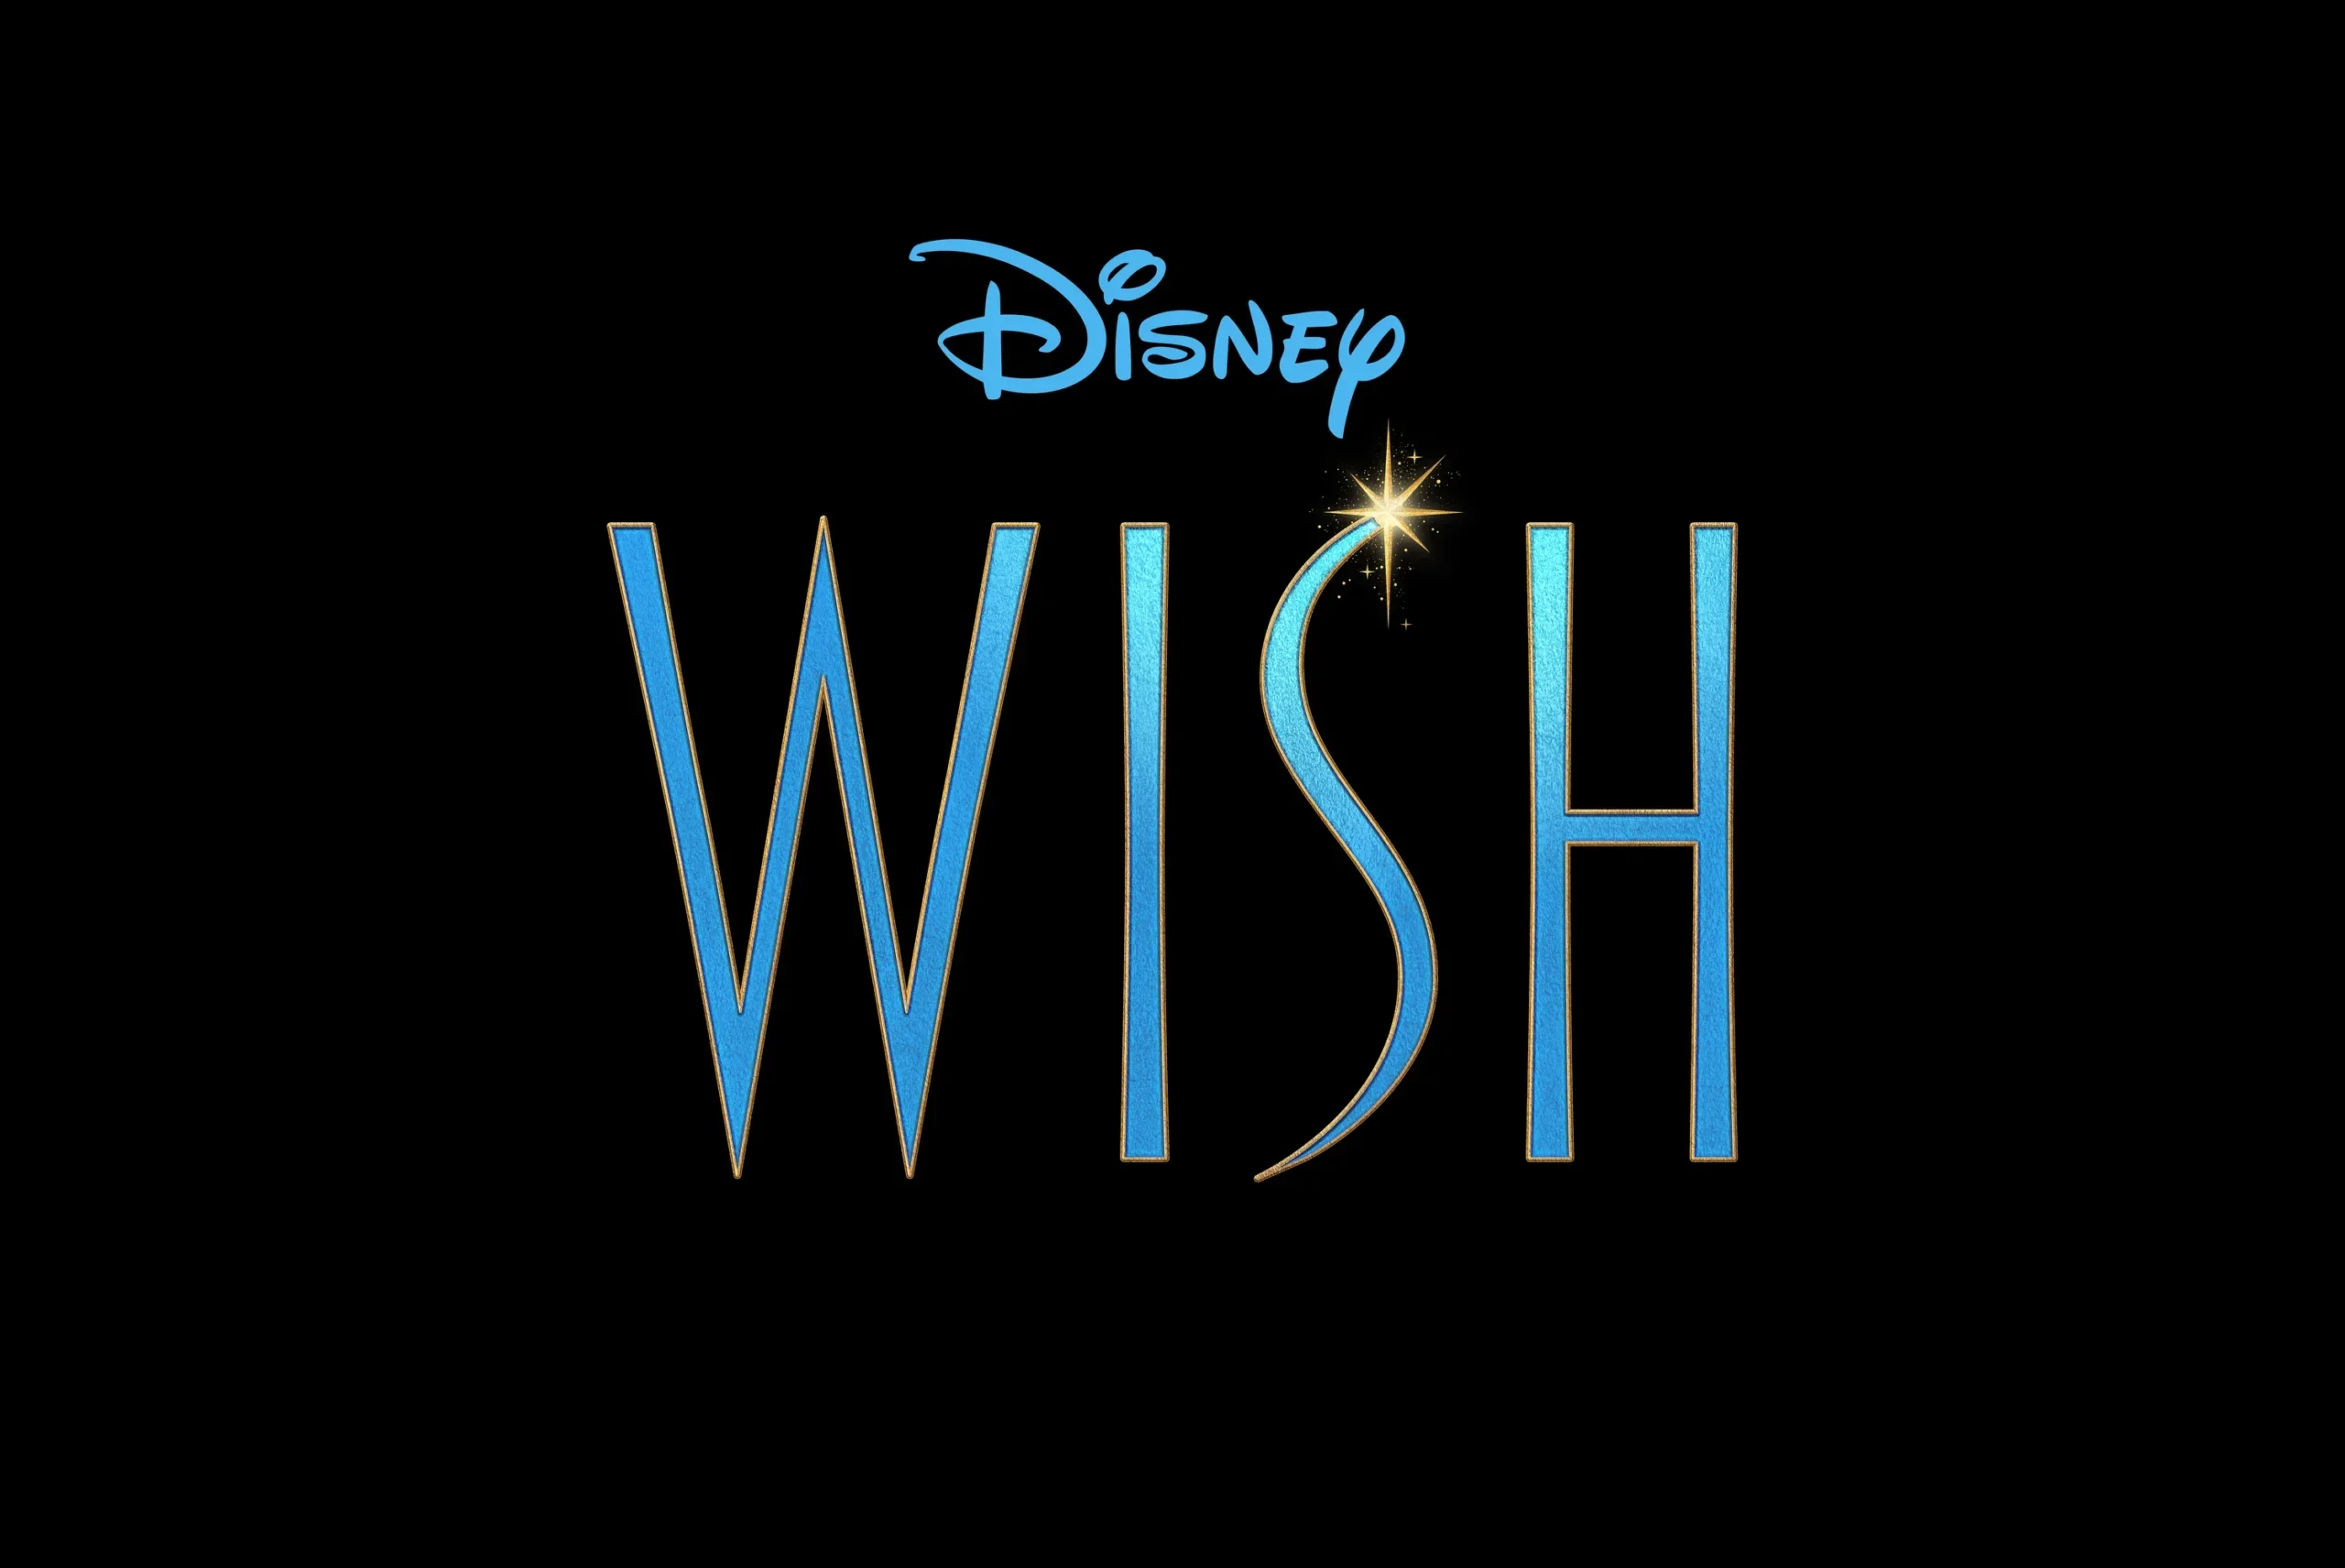 Disney Wish 2023 movie pictures collection - images, posters and official  art 